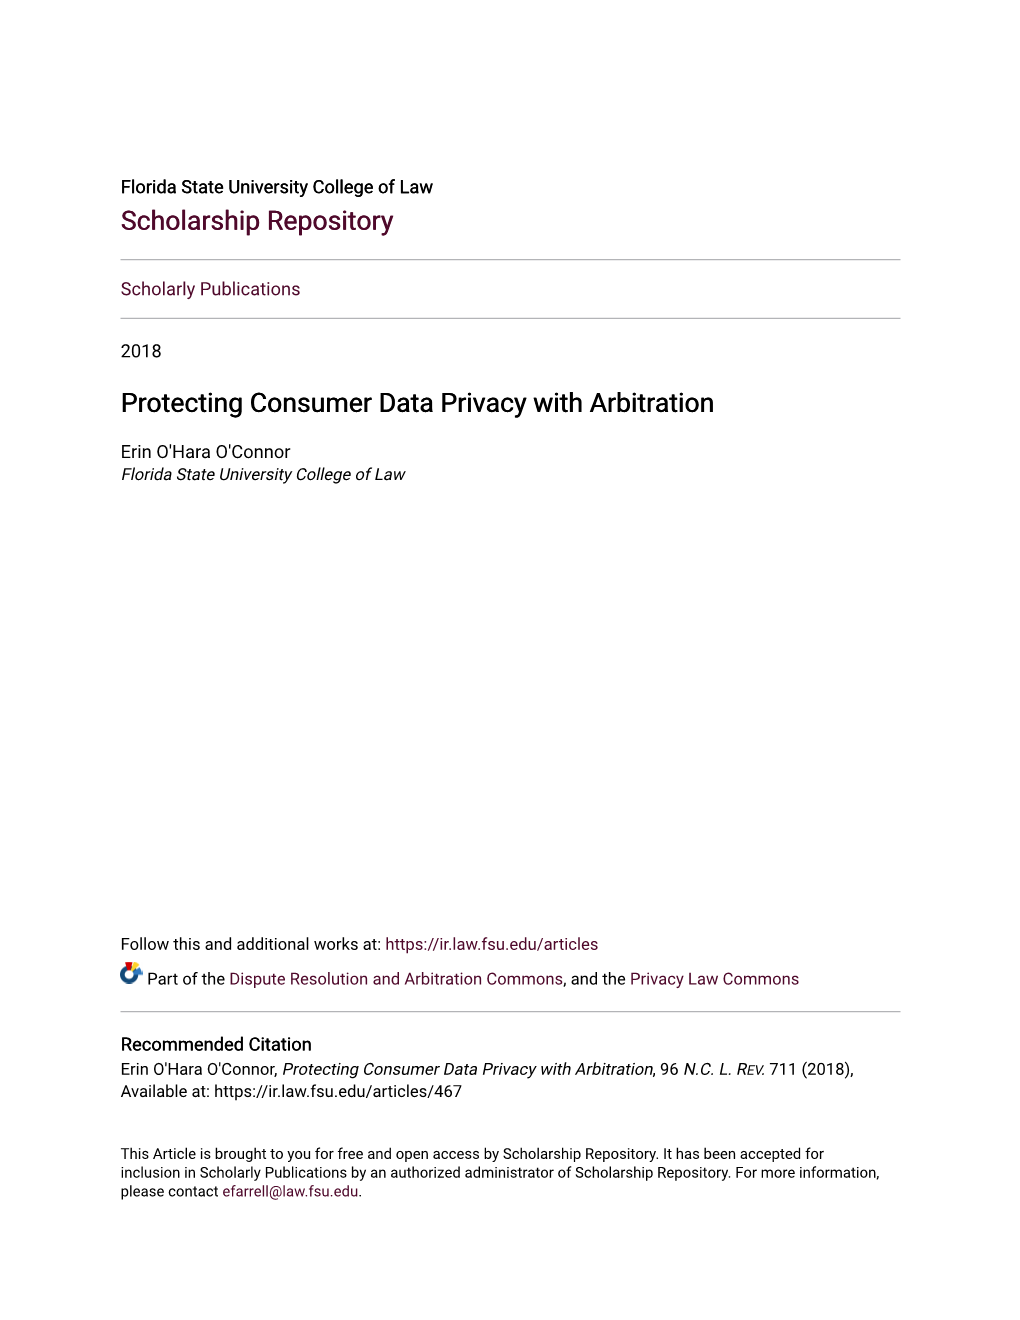 Protecting Consumer Data Privacy with Arbitration